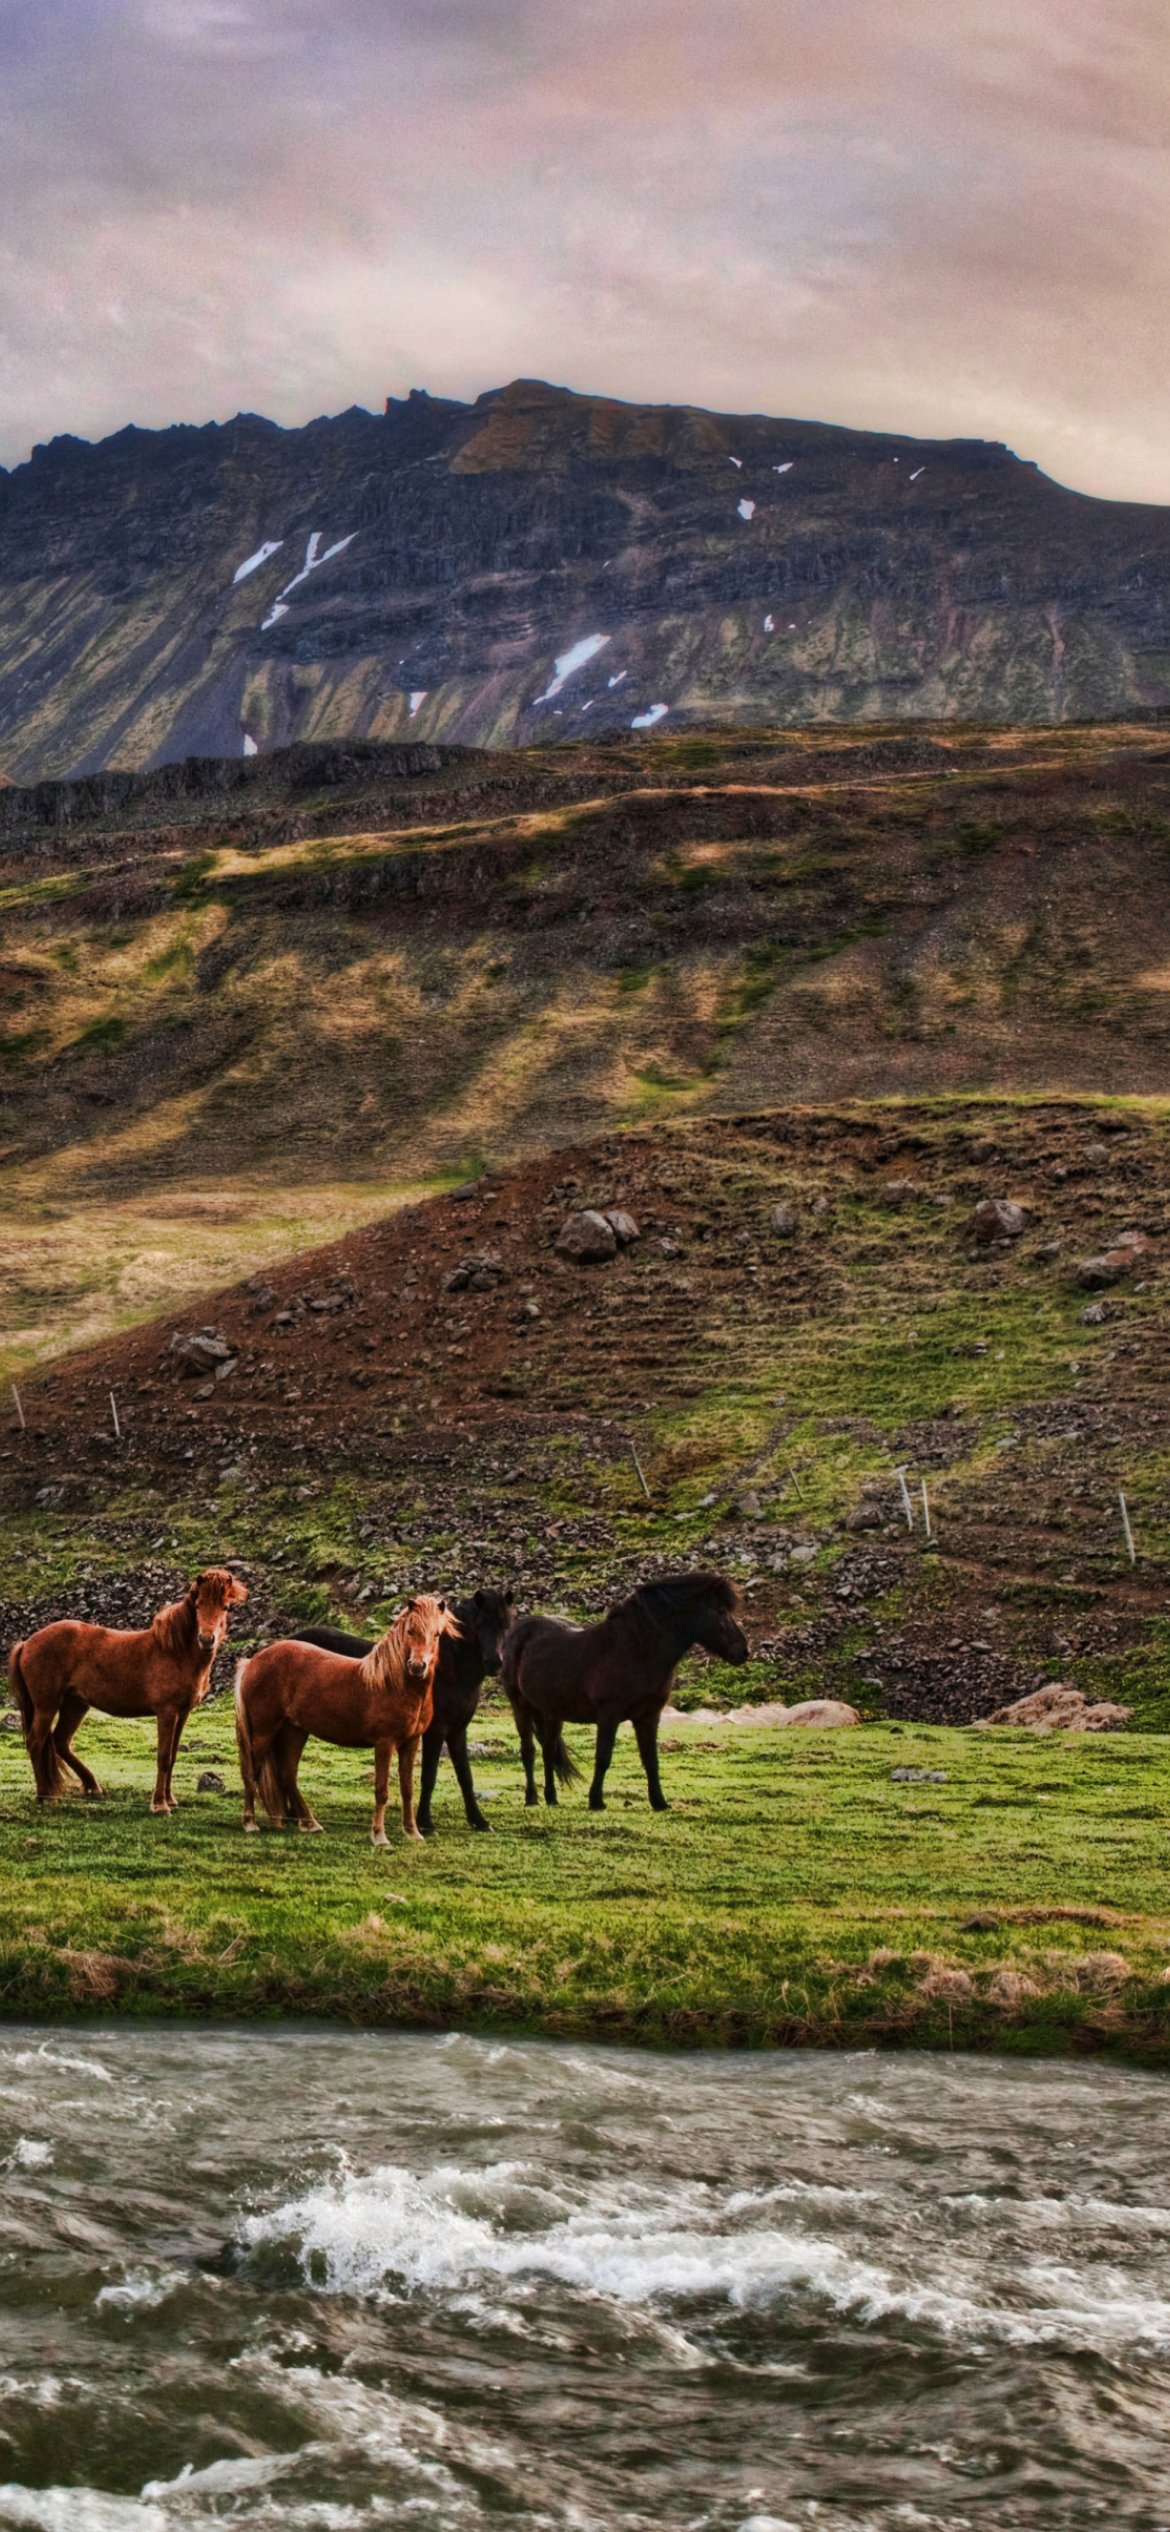 Landscape In Iceland And Horses screenshot #1 1170x2532